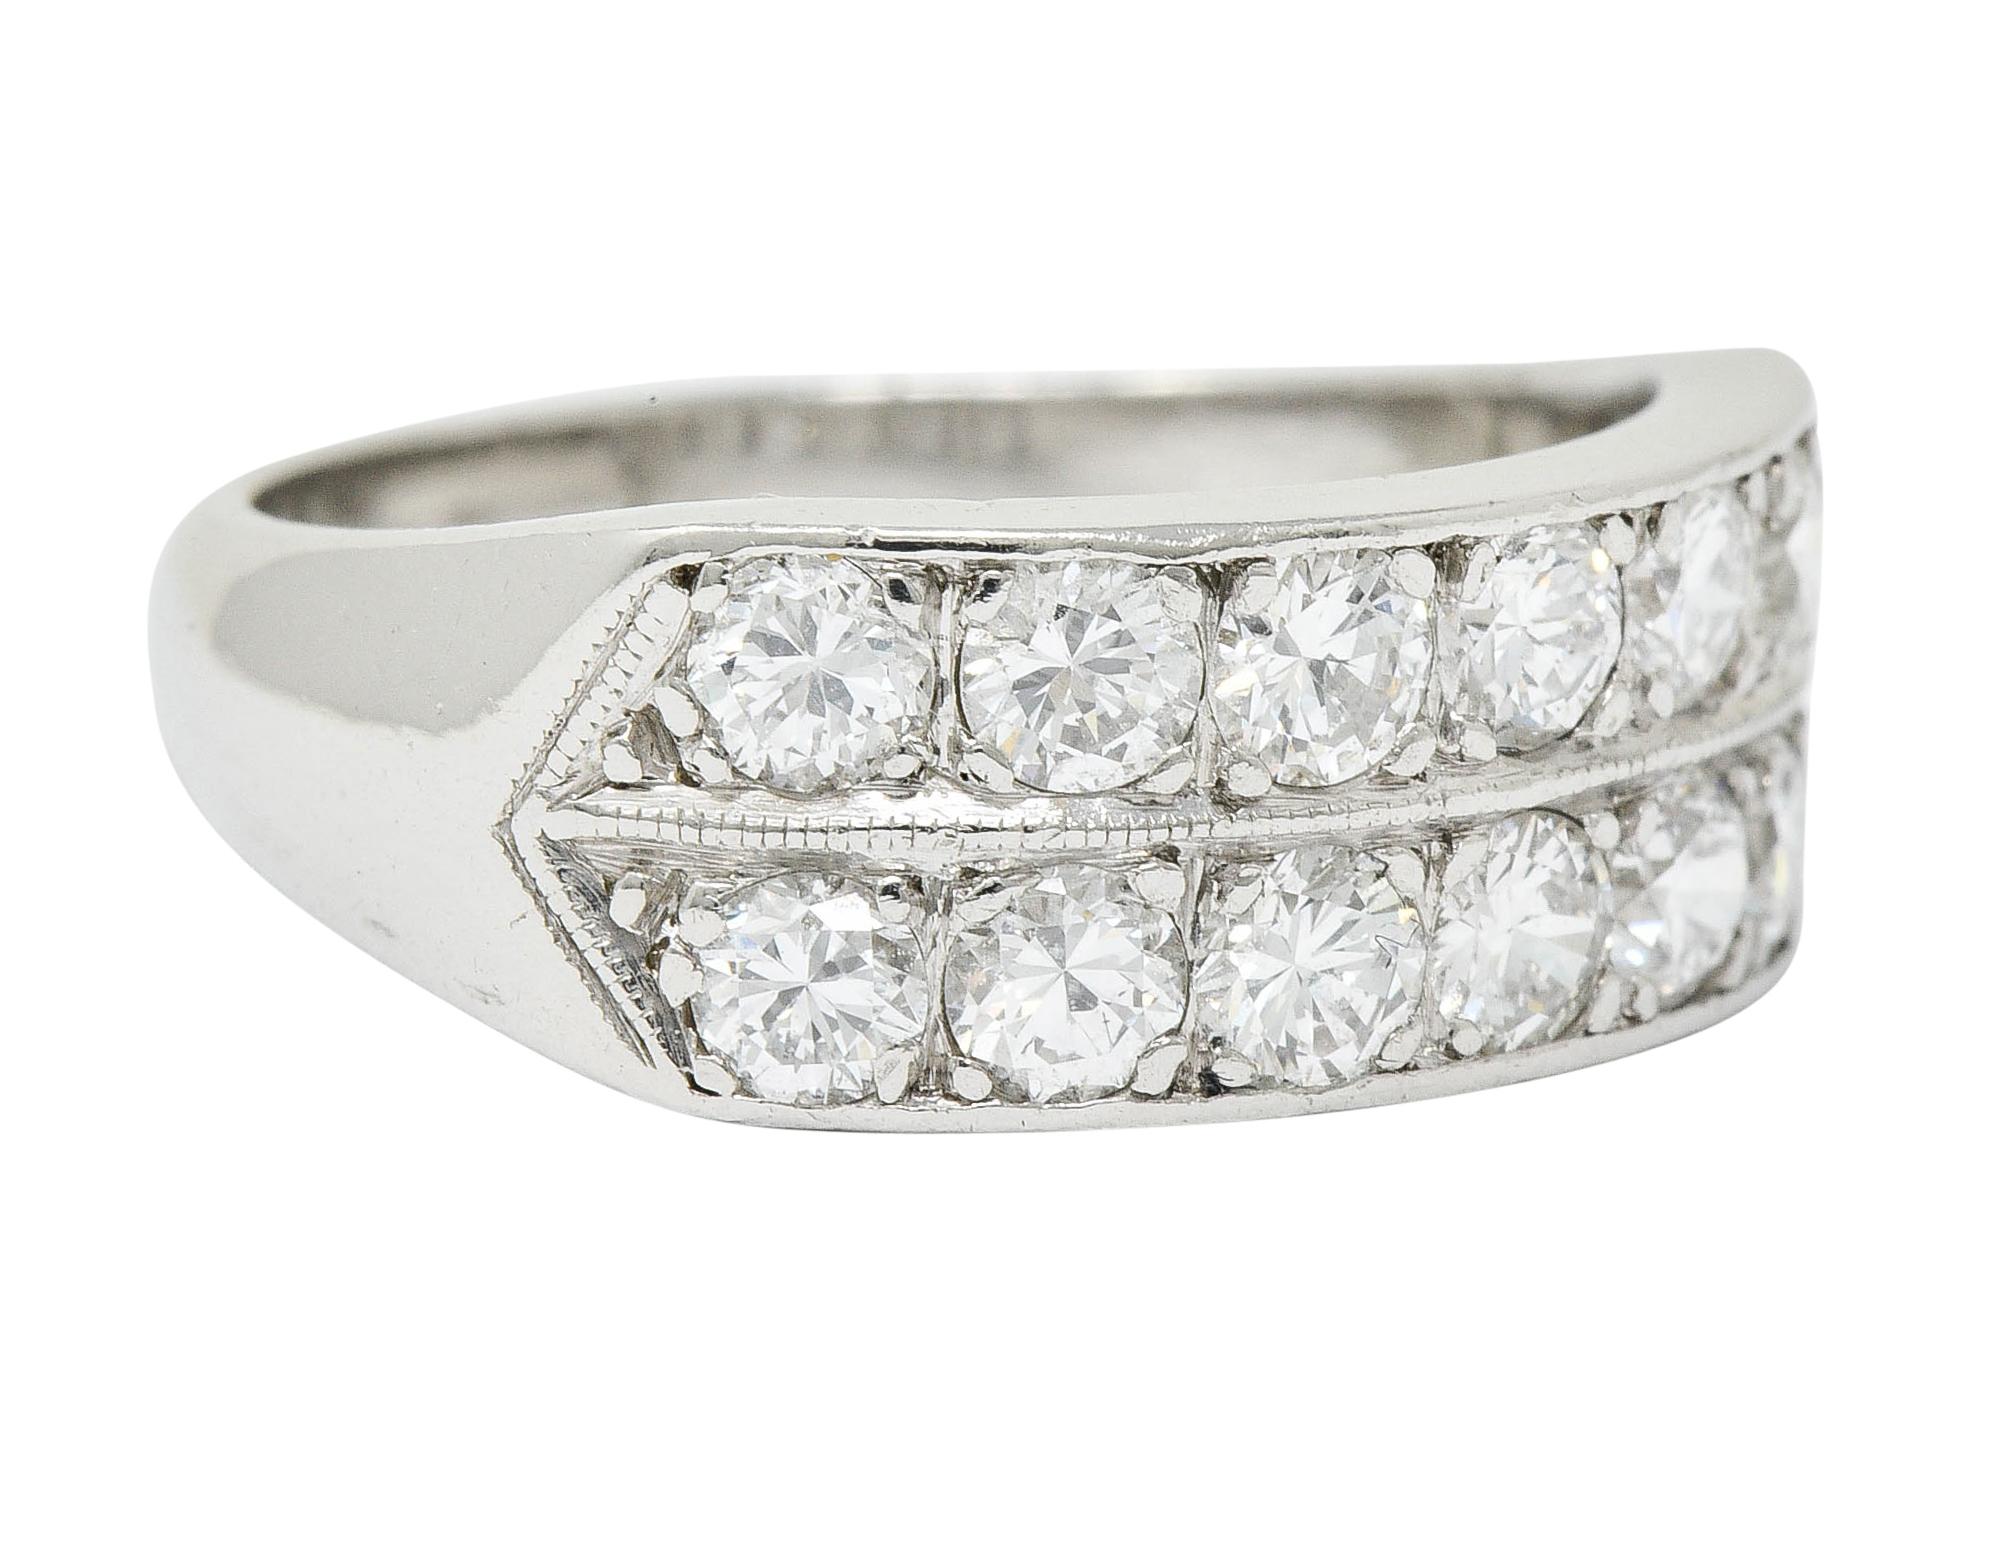 Band ring designed with two rows of diamonds, East to West

Round brilliant cut diamonds weigh in total approximately 1.50 carats; G to I color with VS clarity

Completed by slight milgrain and pointed shoulders

Stamped Plat for platinum

Circa: